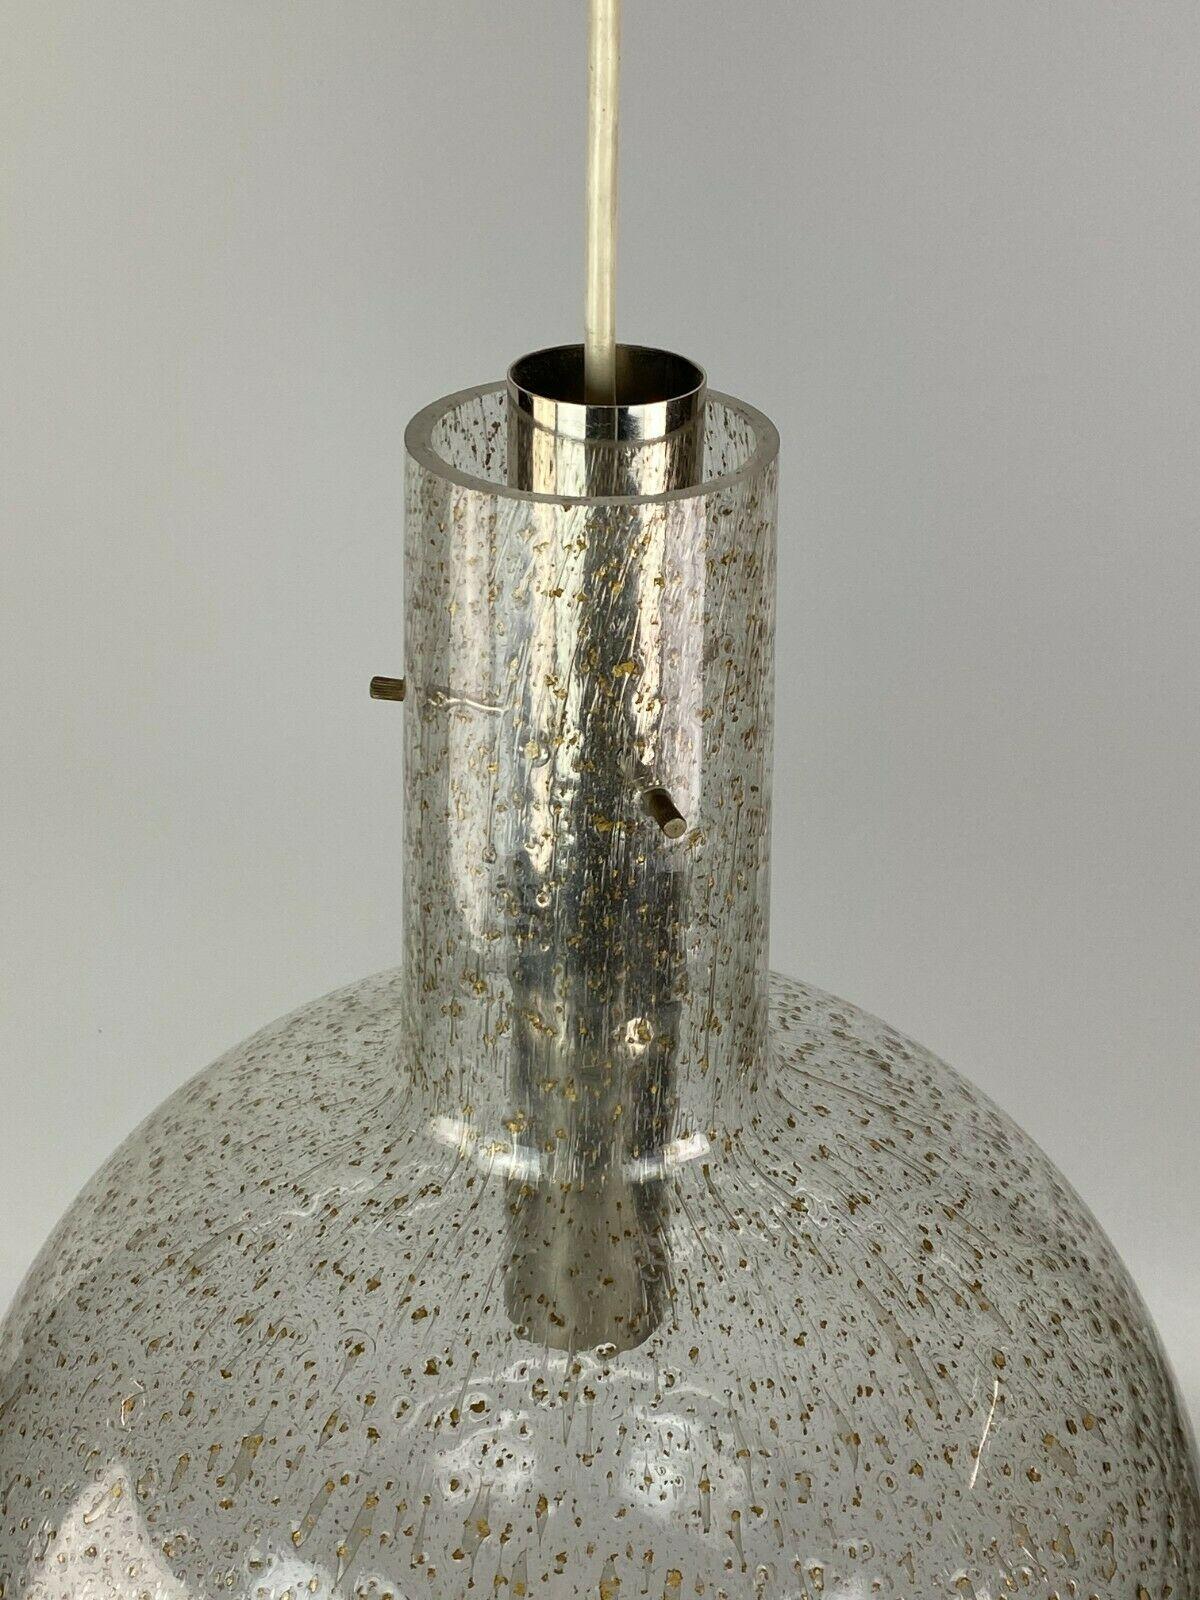 60s 70s Lamp Light Ceiling Lamp Hanging Lamp Temde Glass Space Age Design In Good Condition For Sale In Neuenkirchen, NI